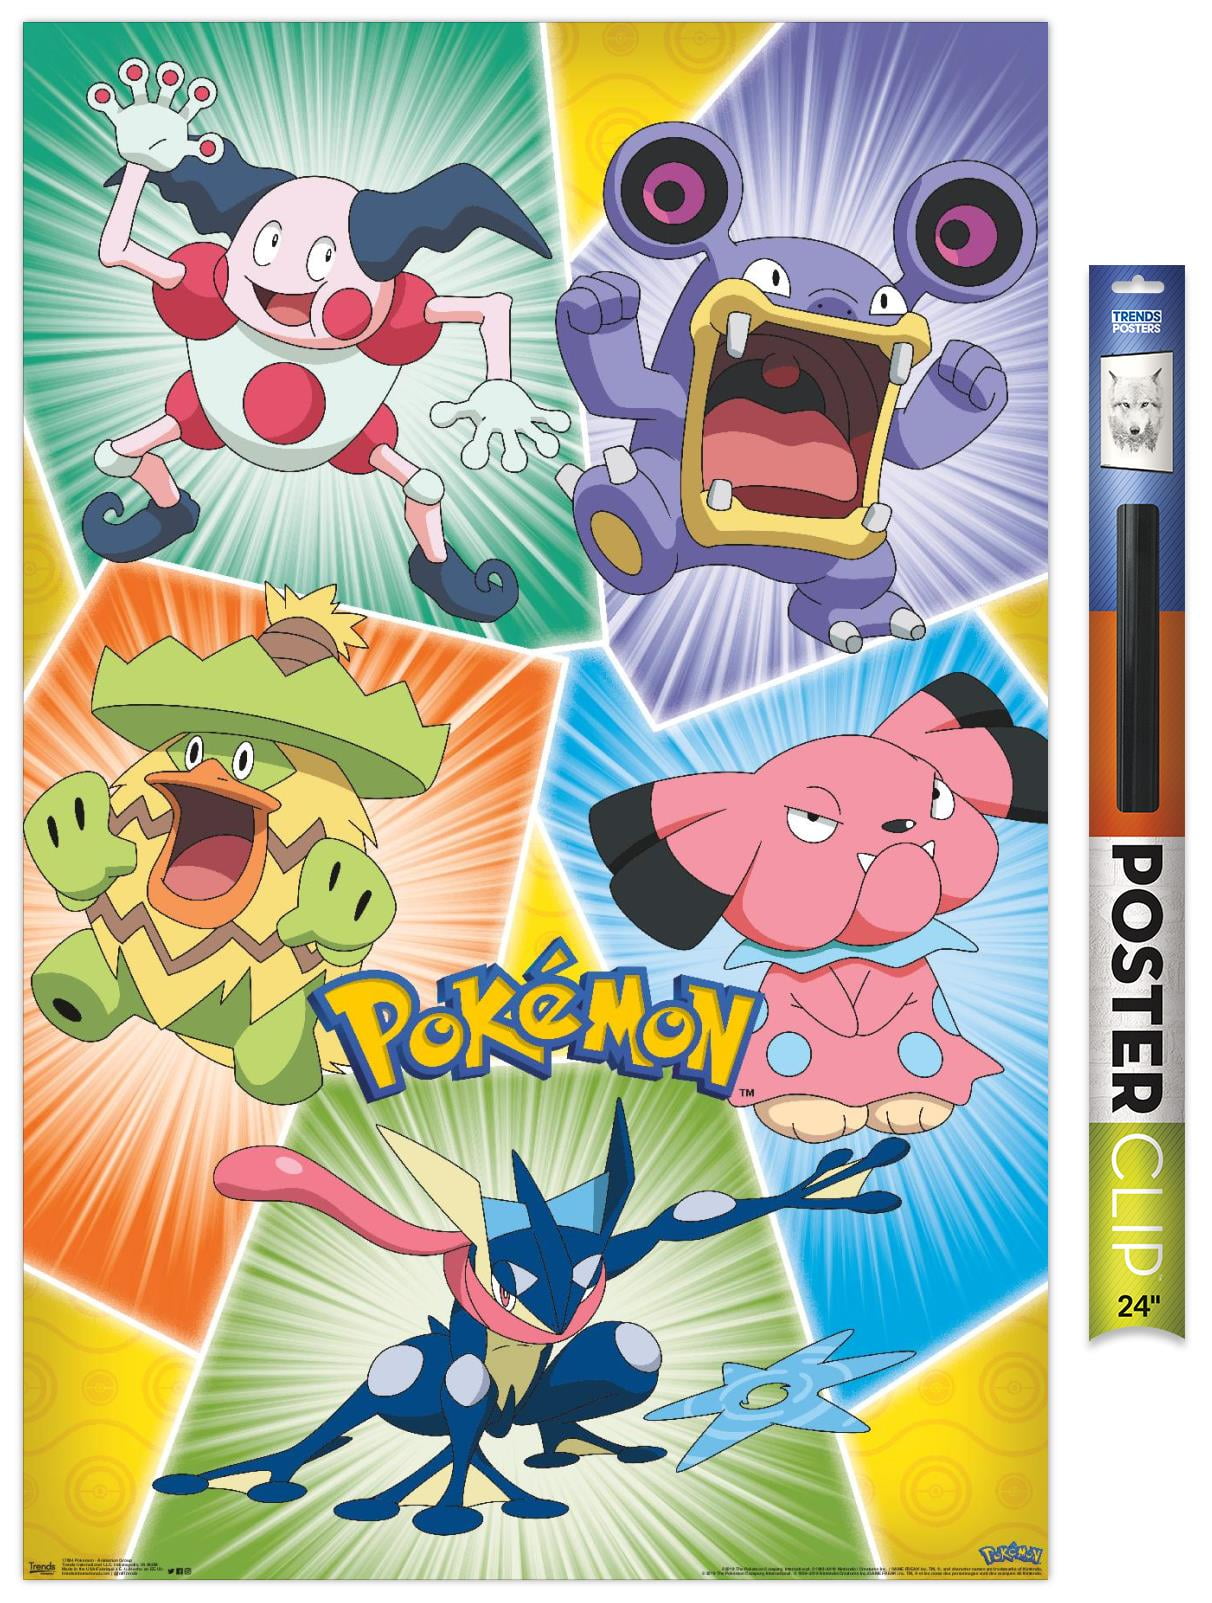 Pokemon Stickers and Posters 